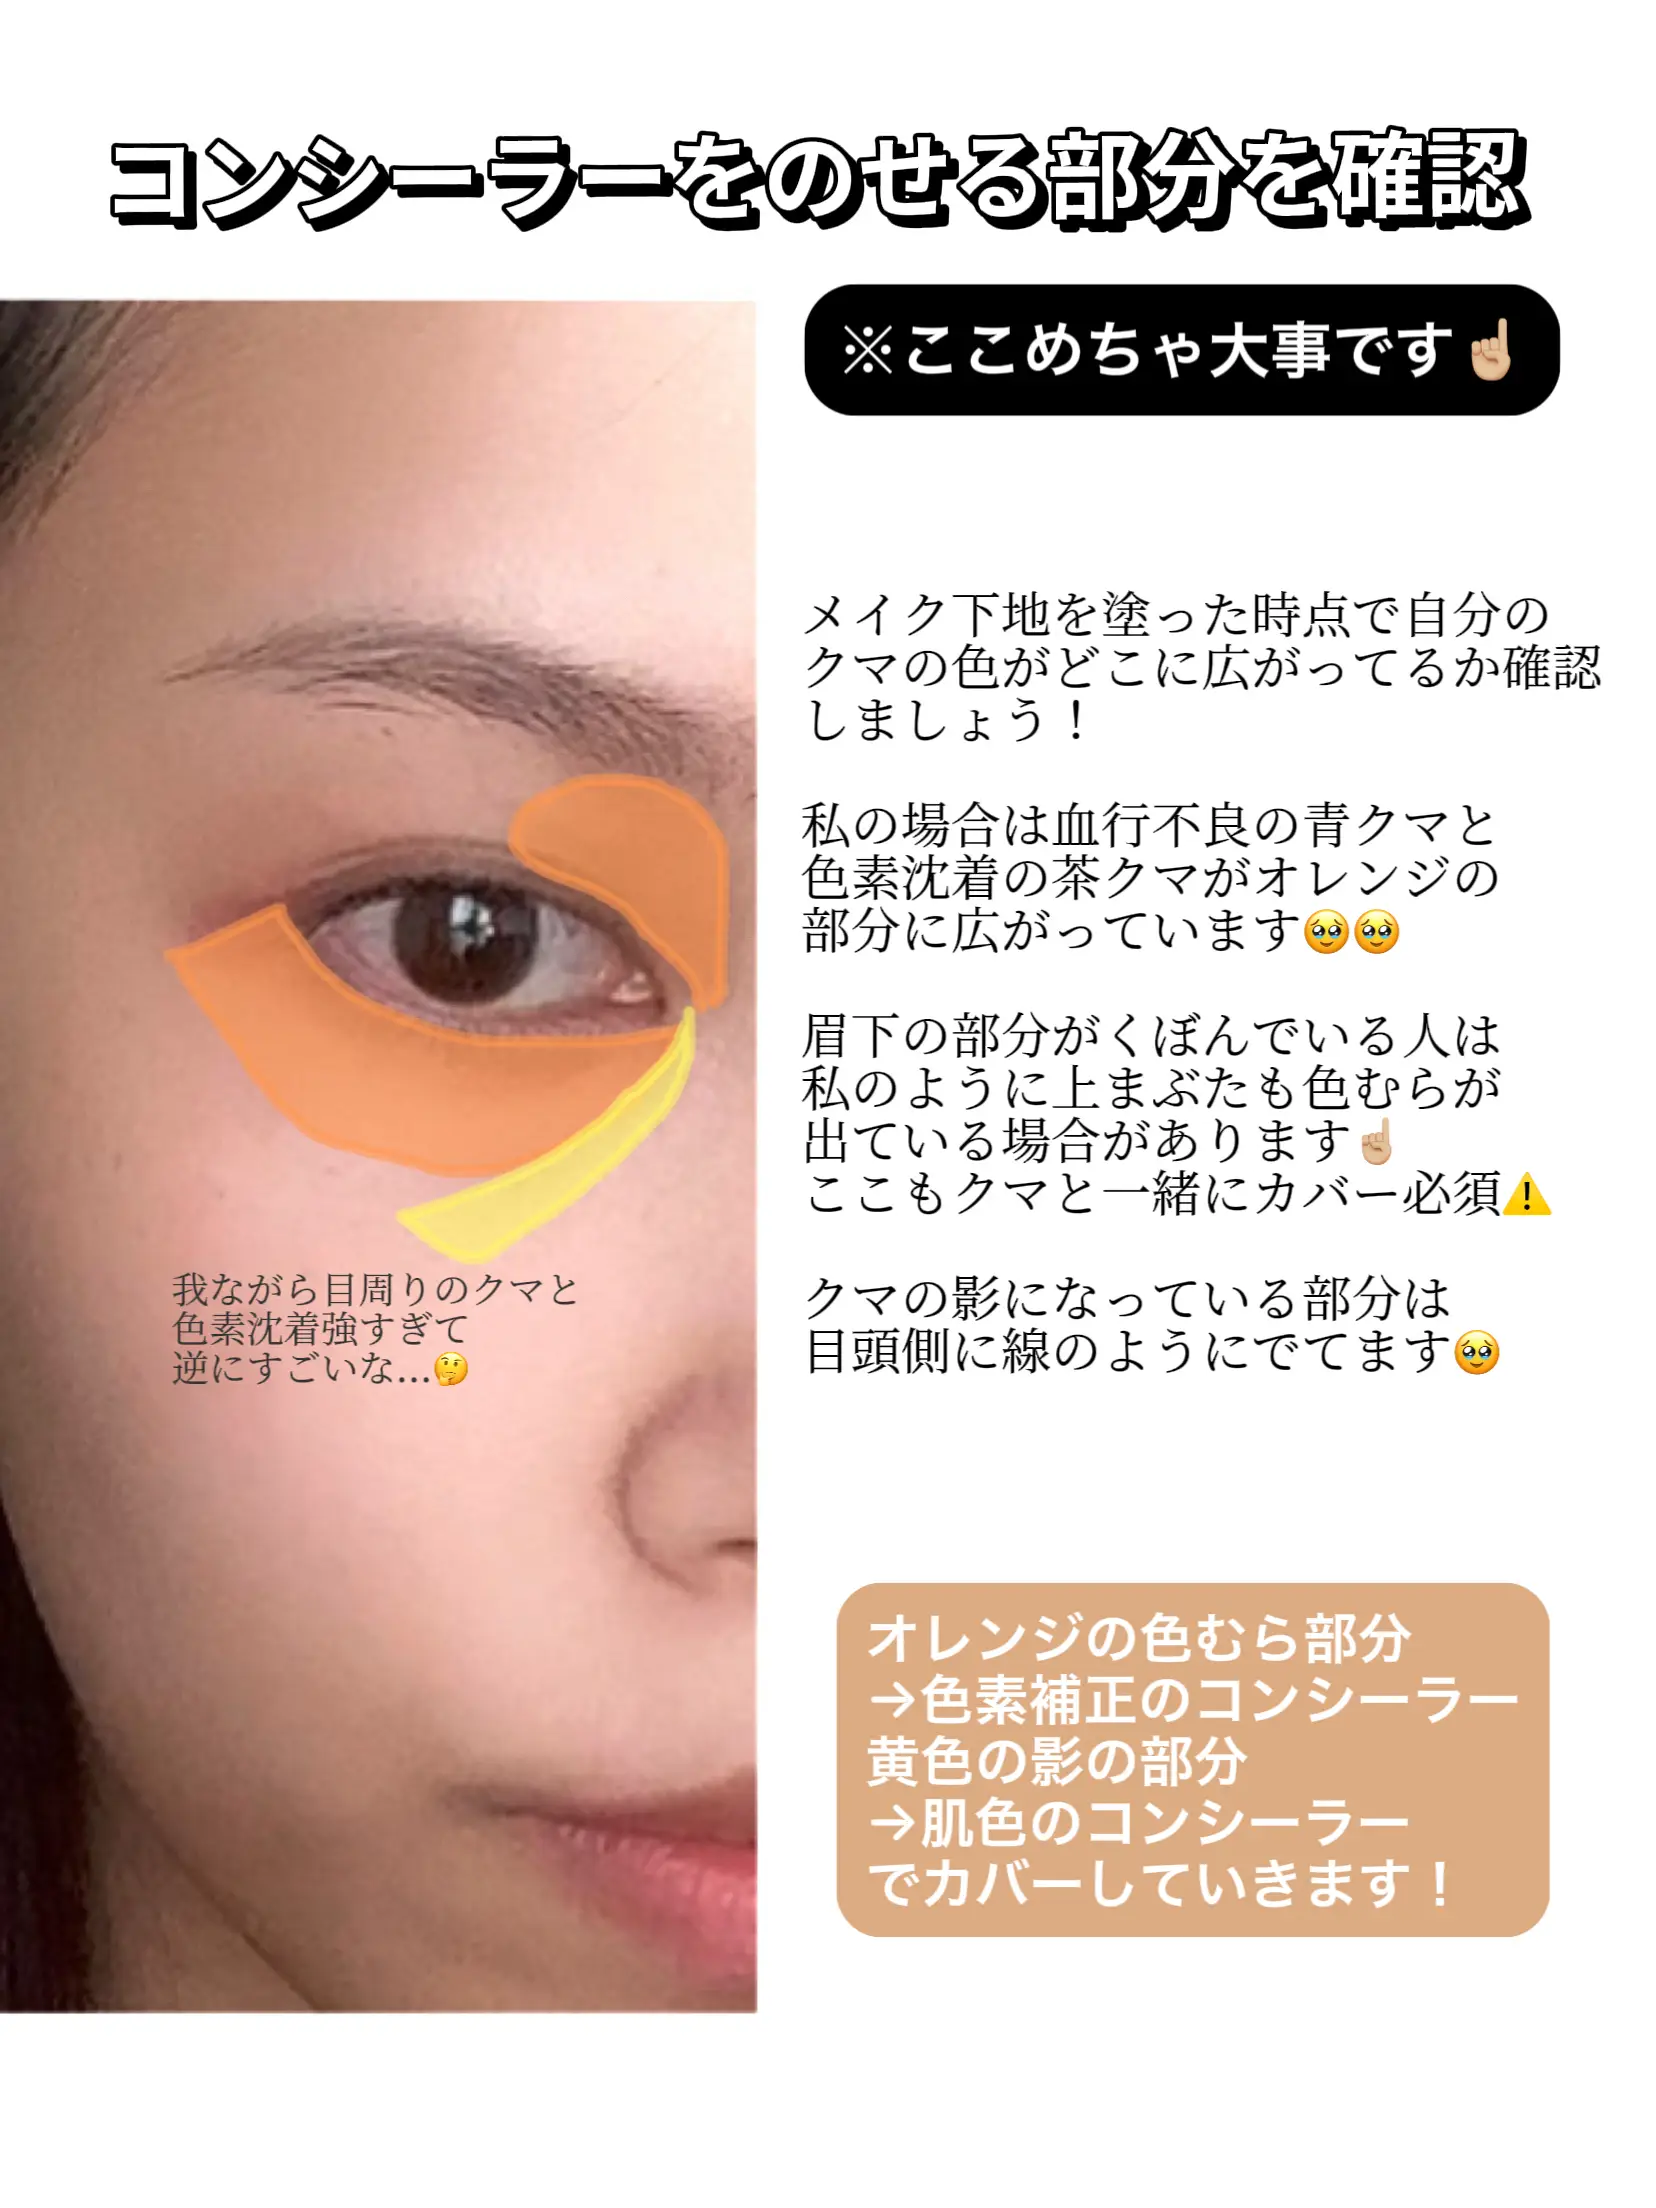 Dark circles disappear 🐻] How to apply concealer under the eyes